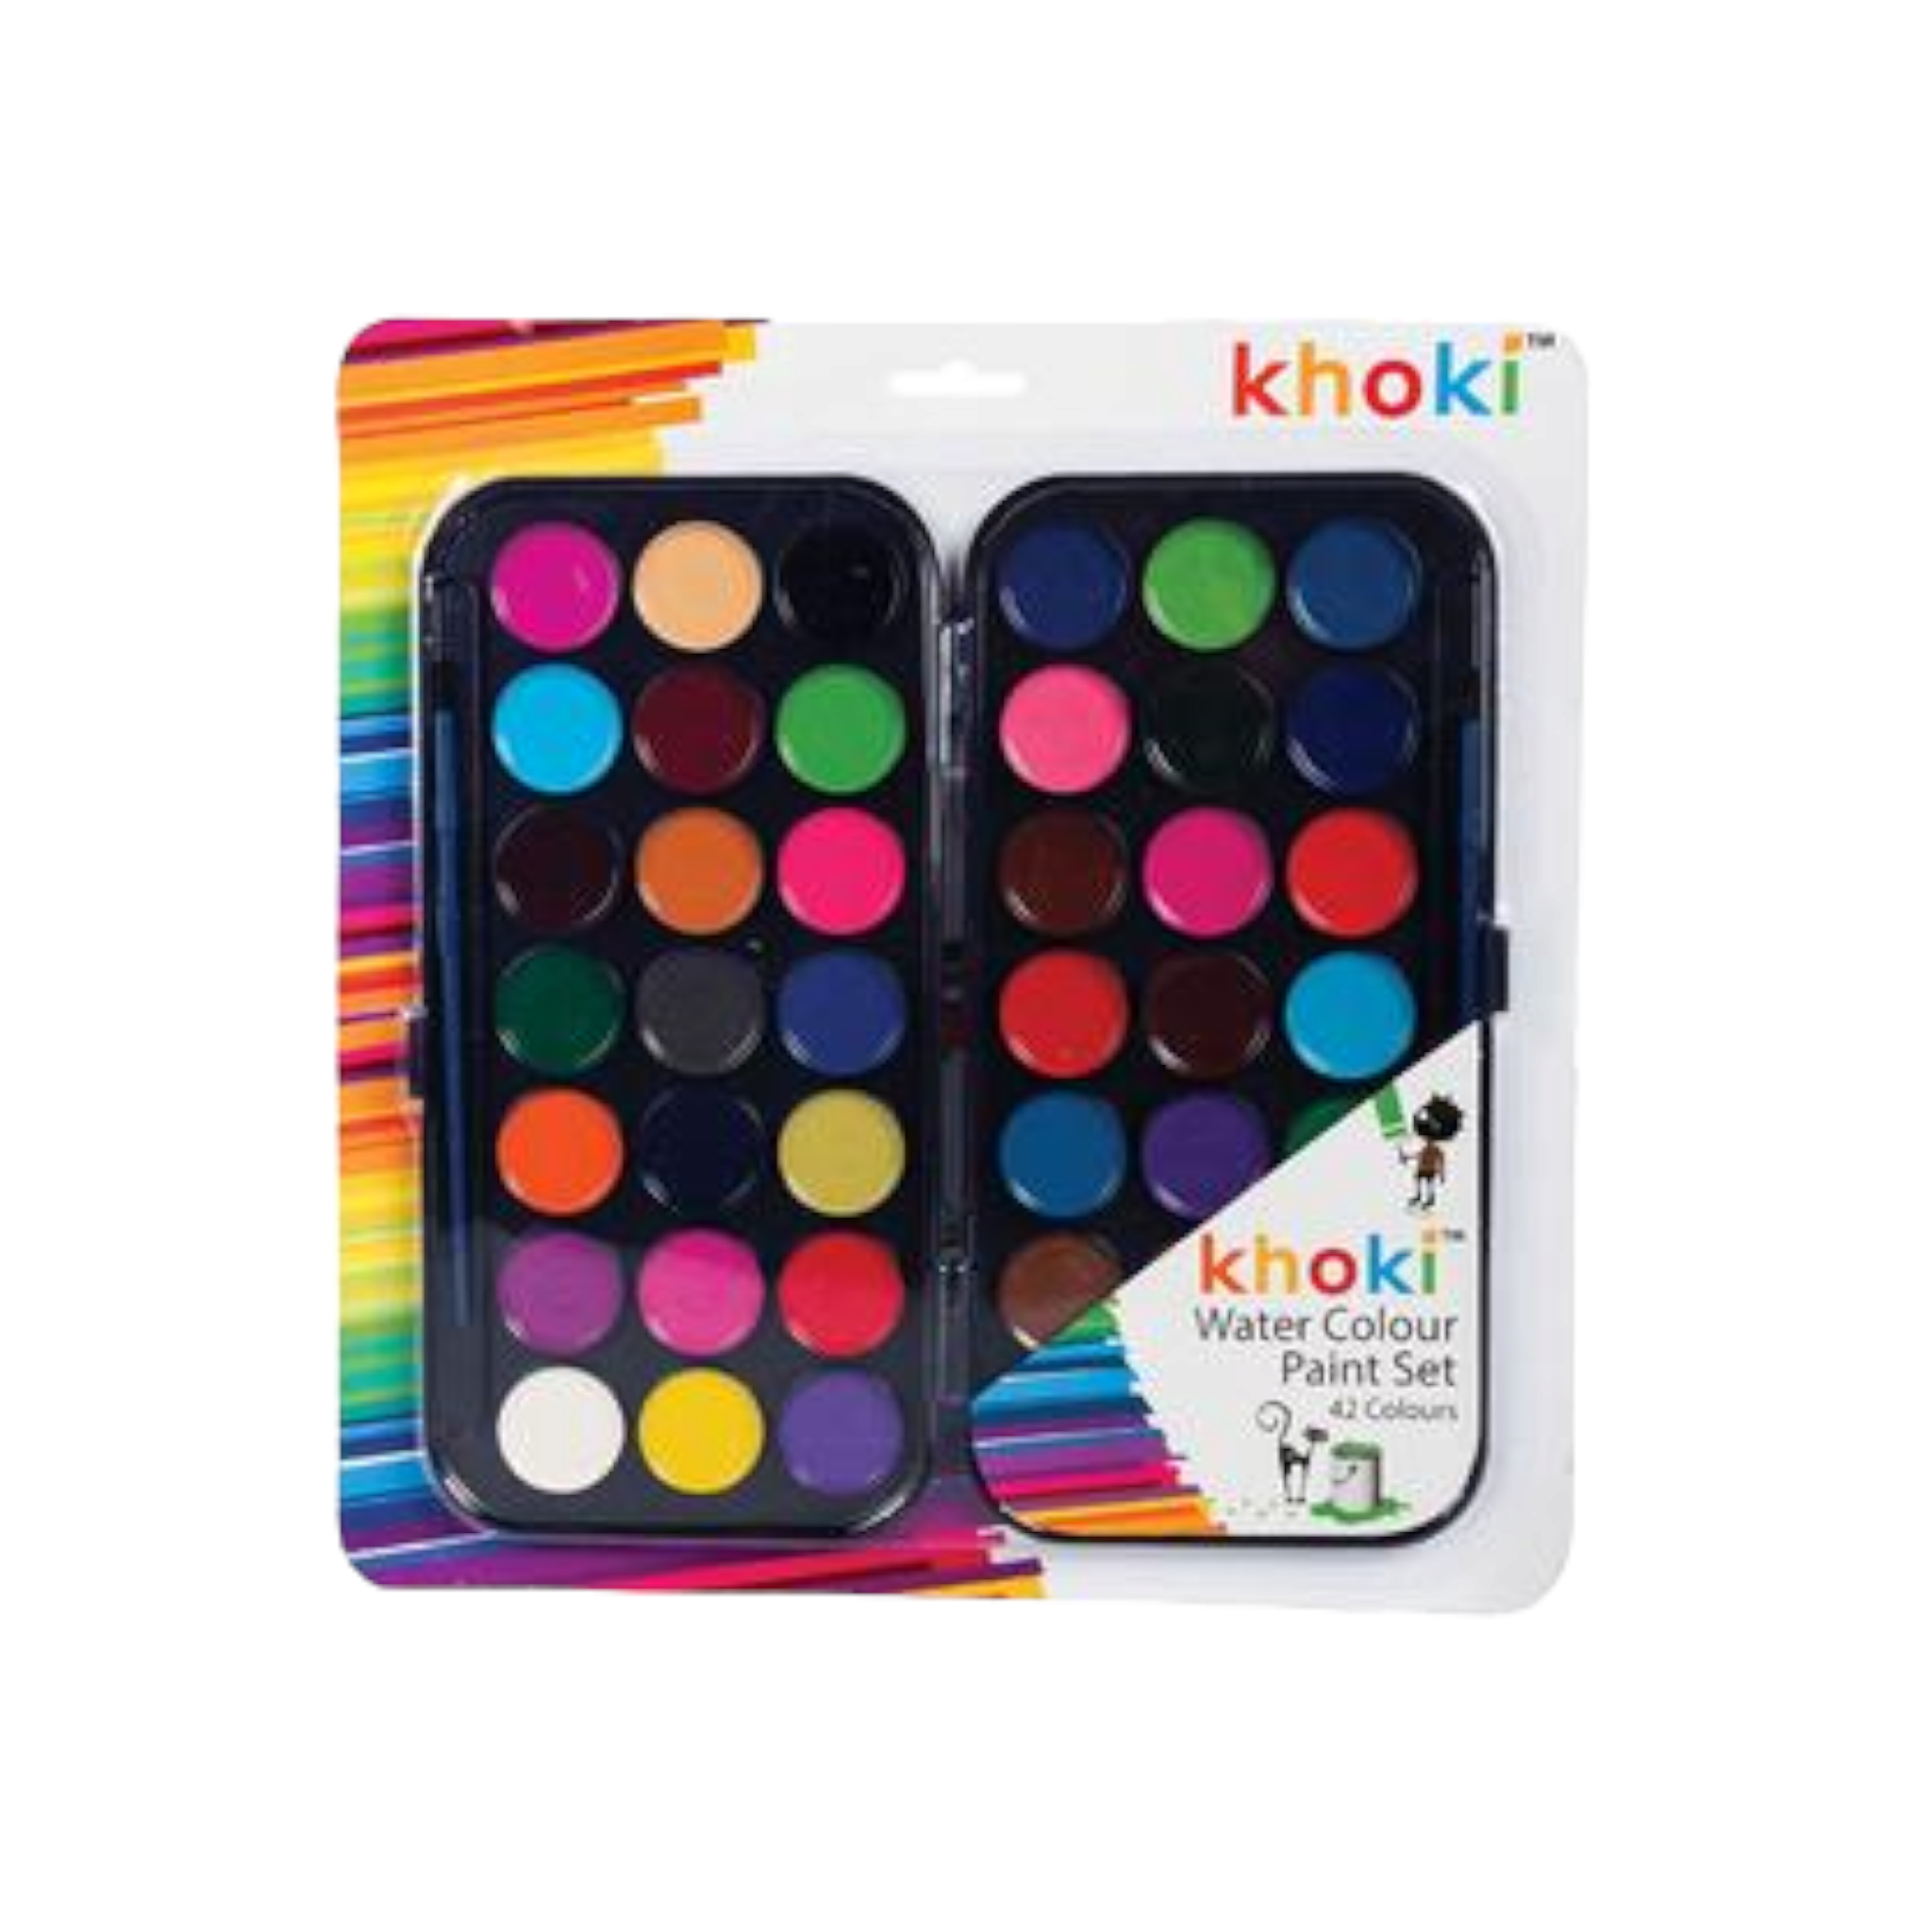 Khoki Water Paint Water Colour Craft with Art 42 Pack